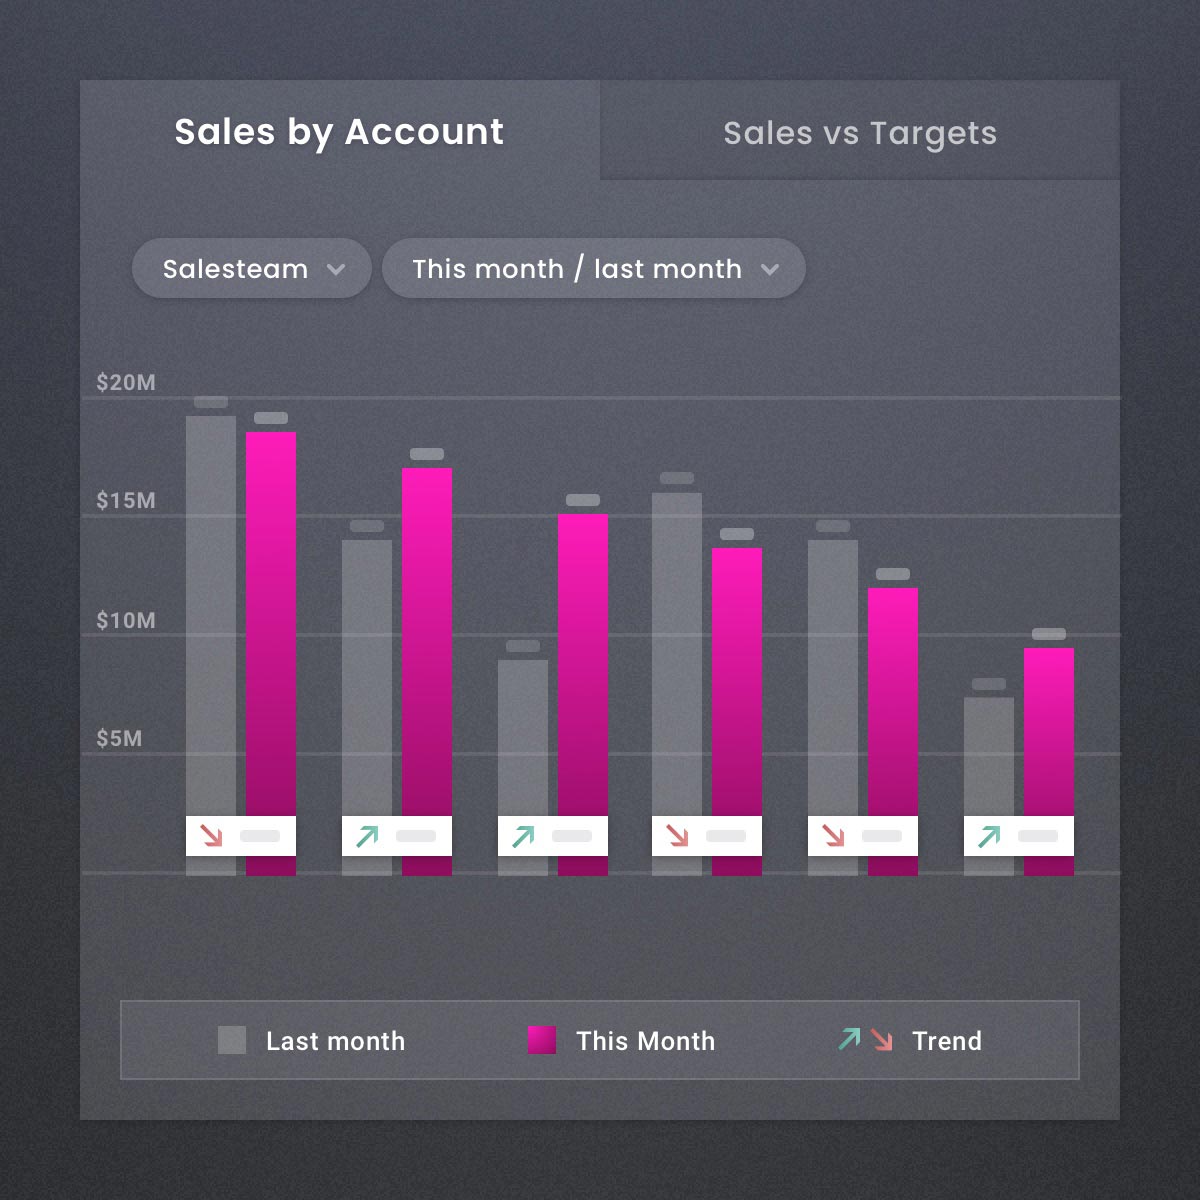 Sales by Account